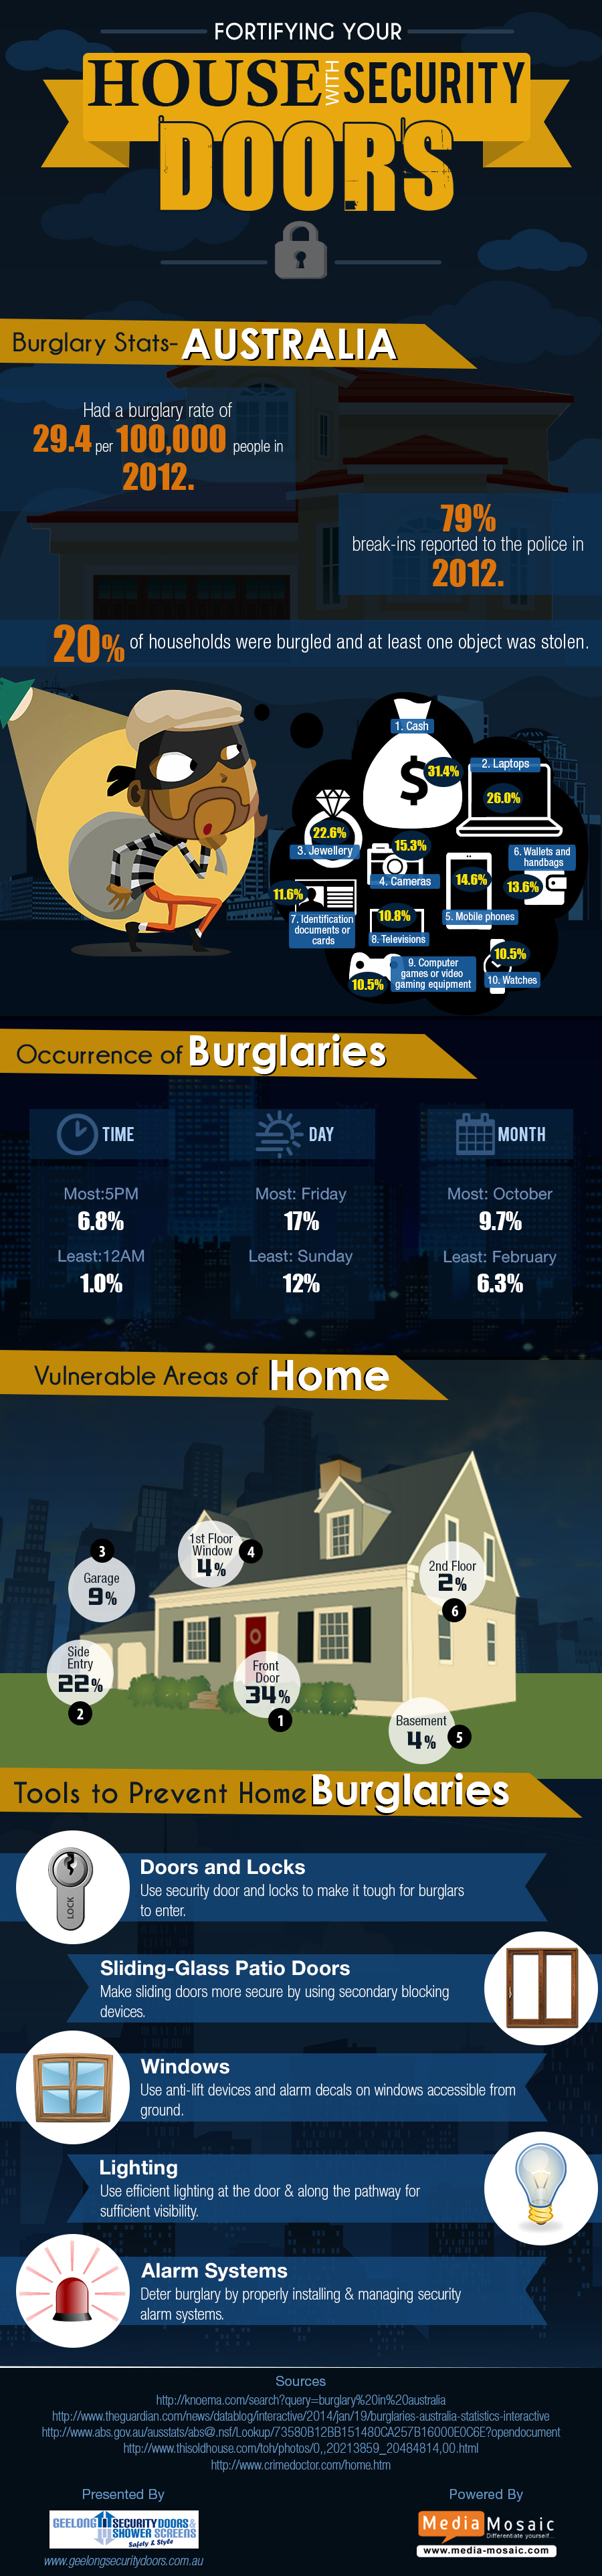 Fortifying-house-with-security-doors-Infographic